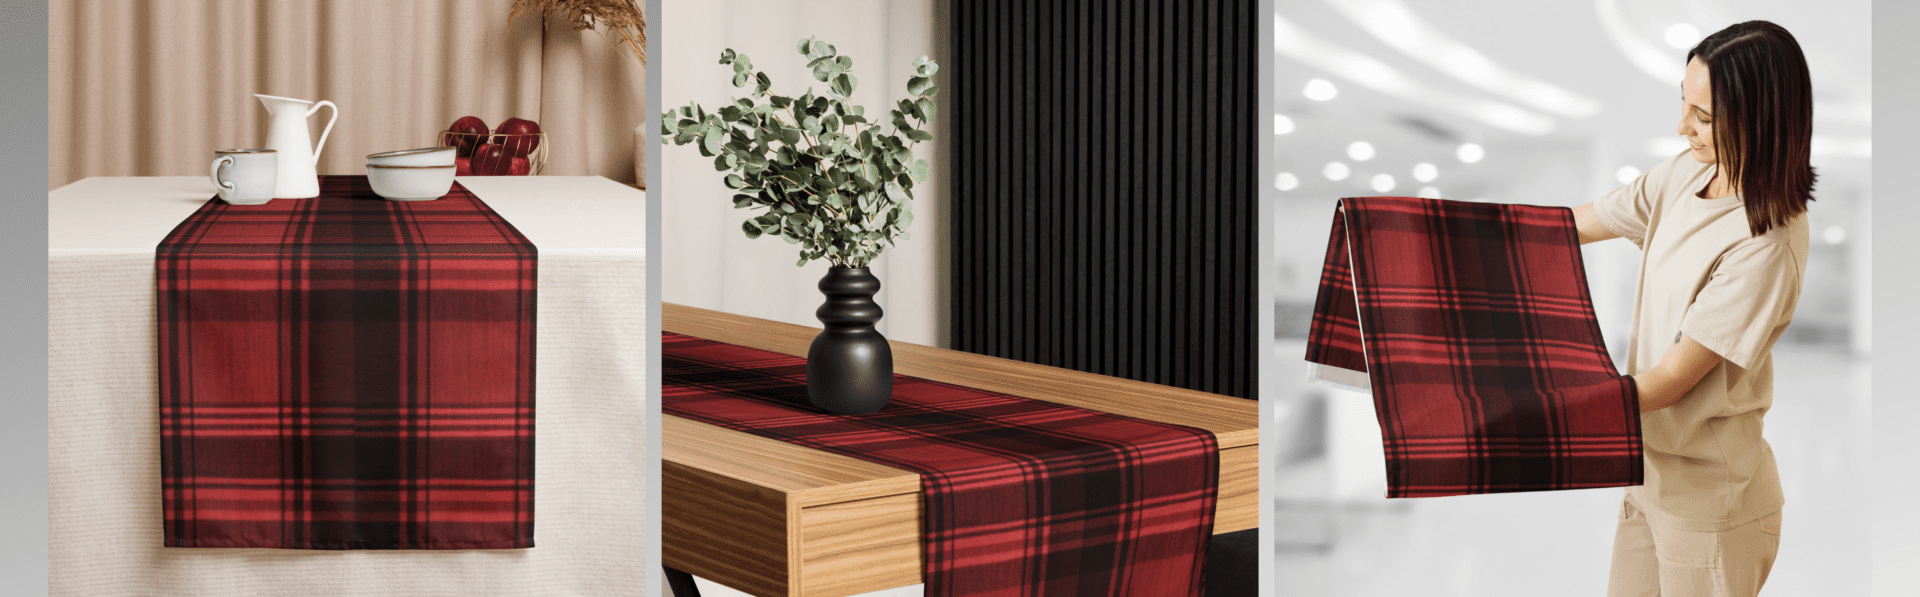 Red and black plaid table runner.